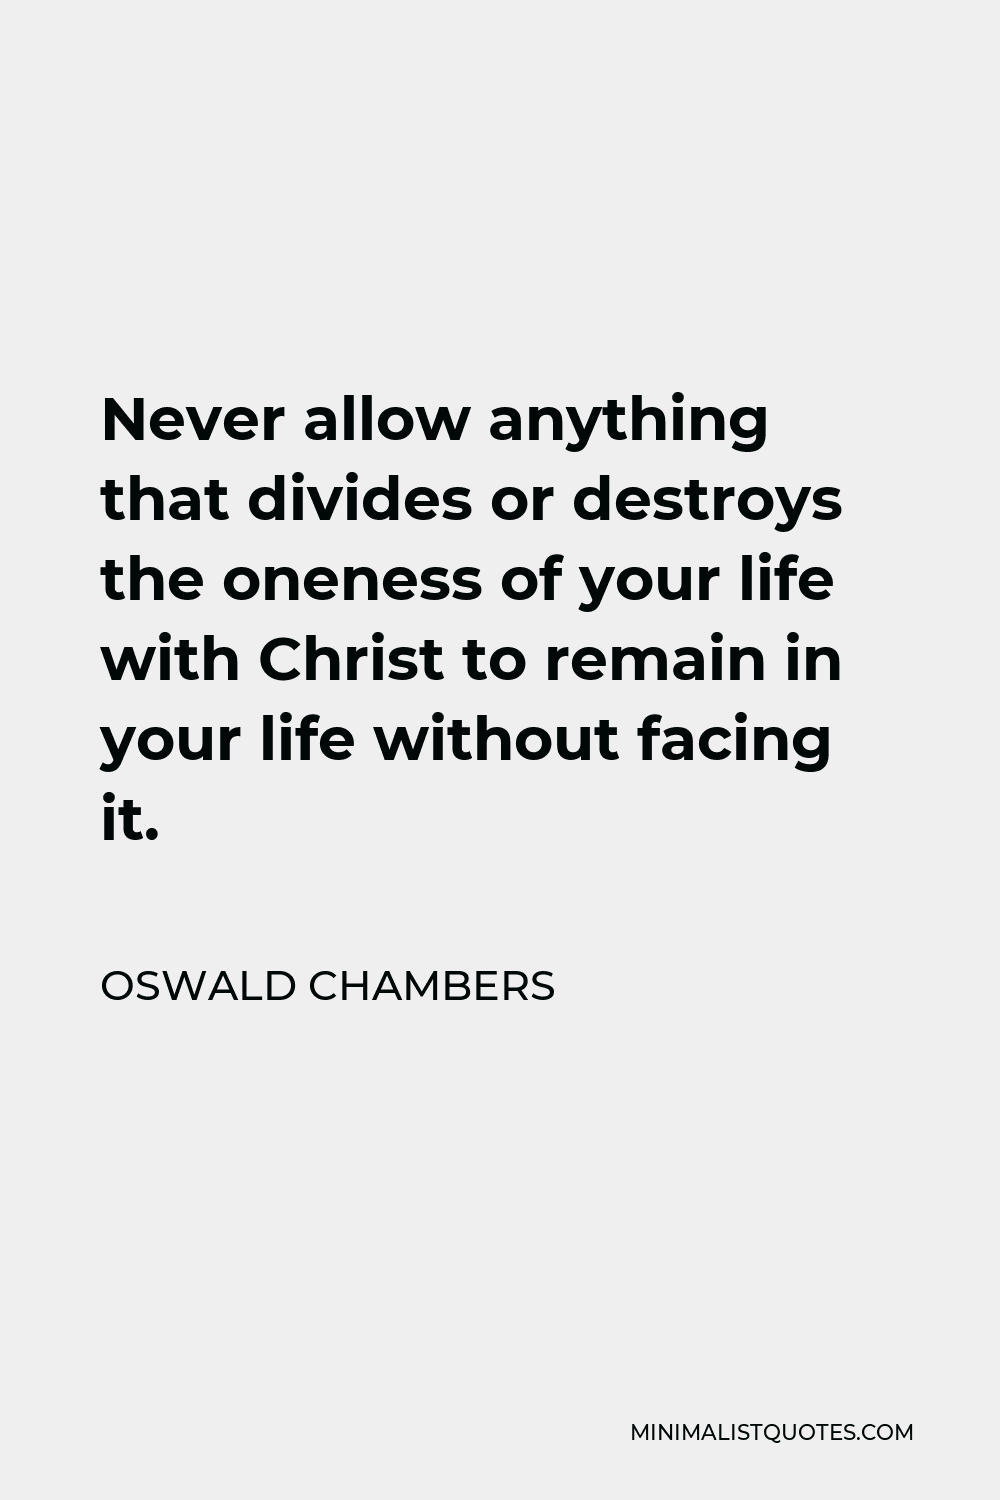 Oswald Chambers Quote - Never allow anything that divides or destroys the oneness of your life with Christ to remain in your life without facing it.